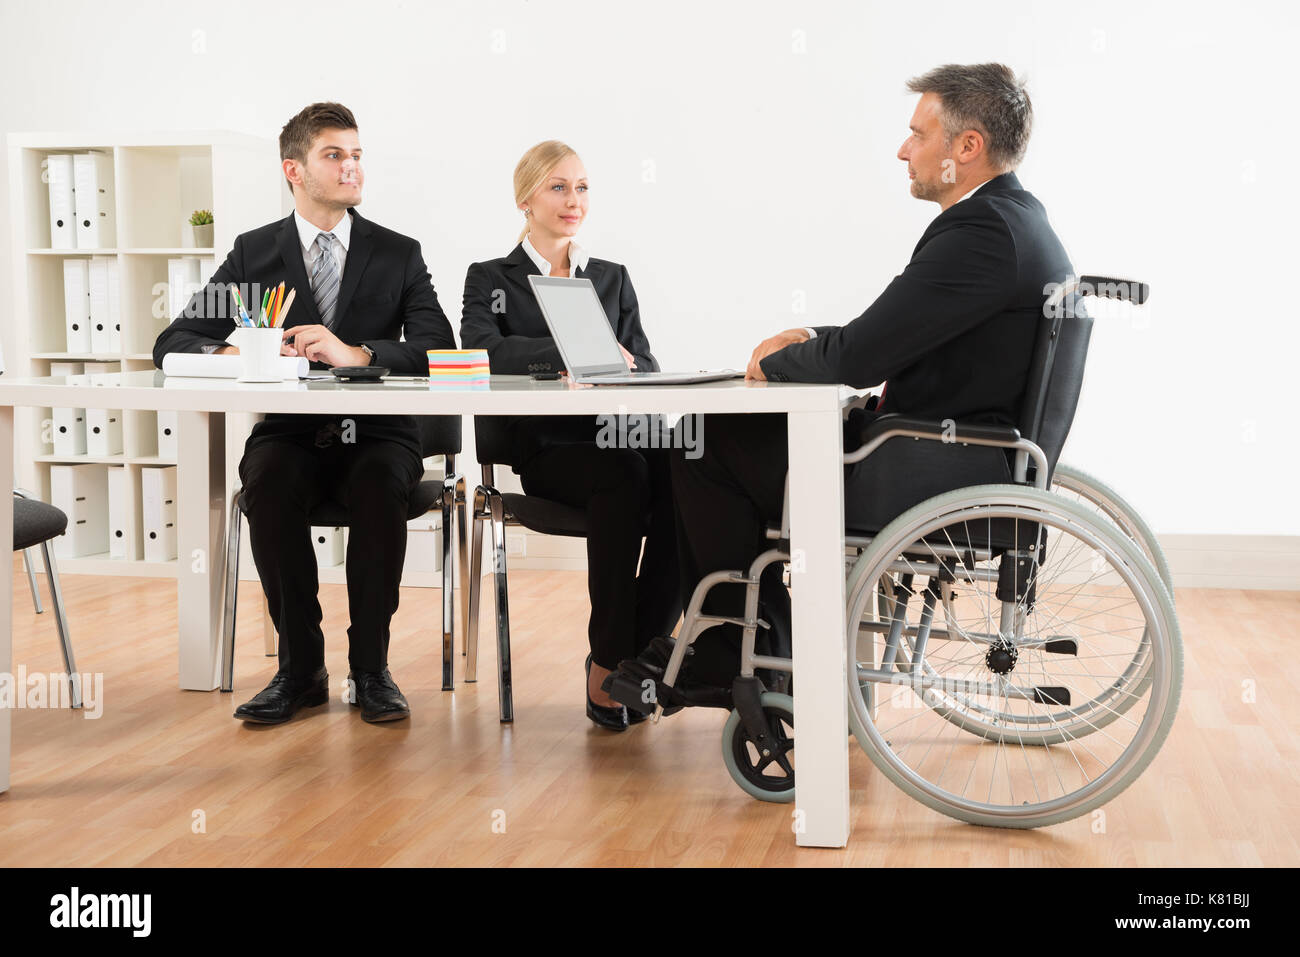 Mature Disabled Businessman Discussing With His Co-workers In Office Stock Photo